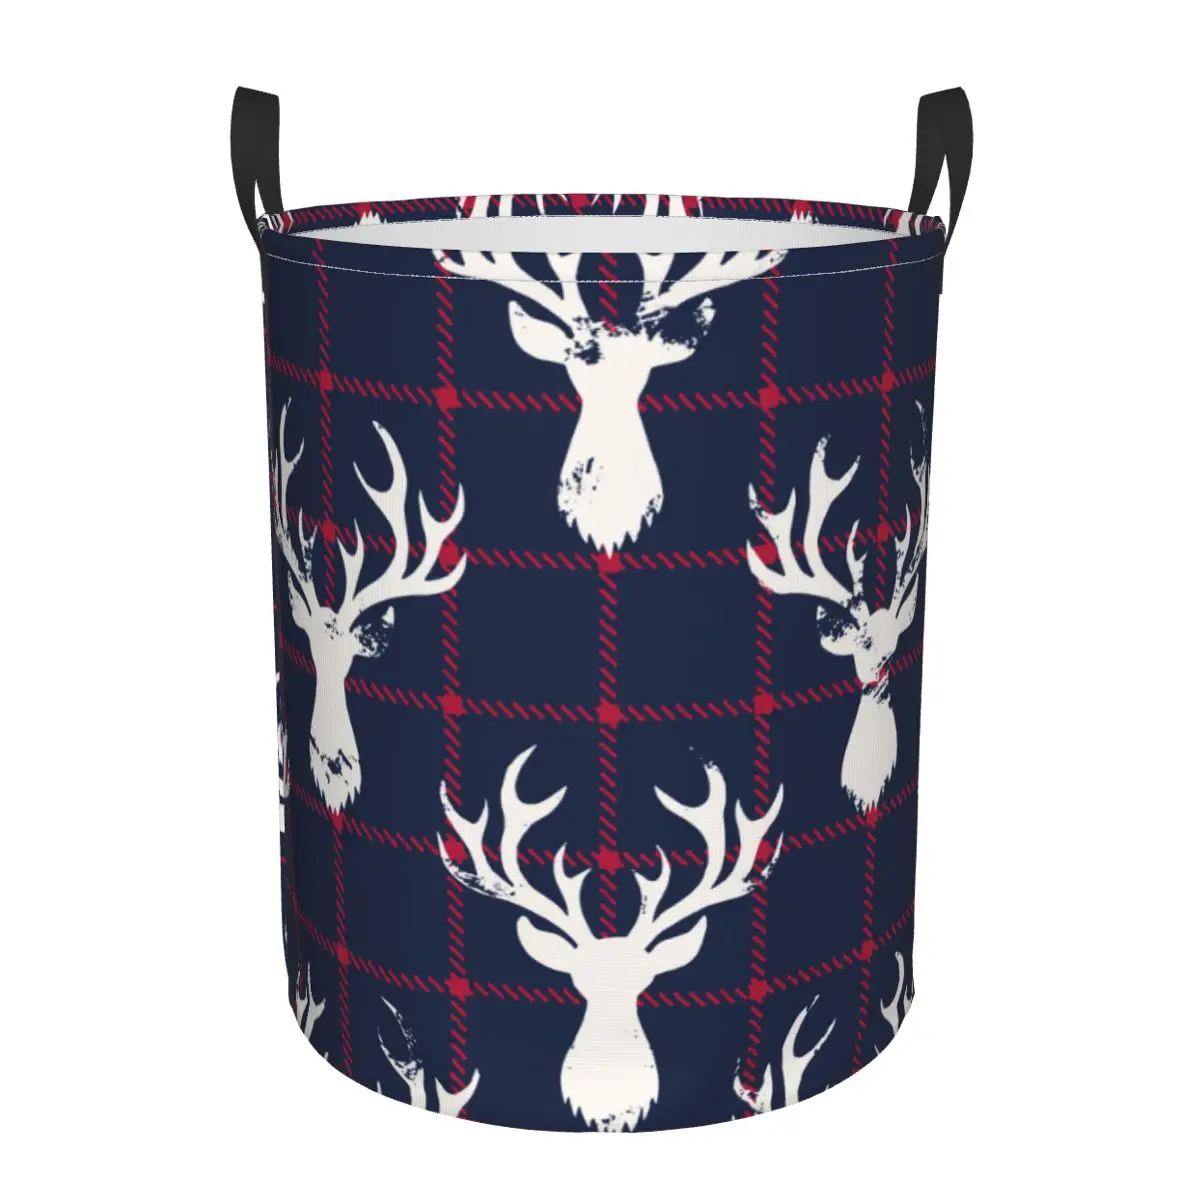 

Foldable Laundry Basket for Dirty Clothes Deer Head On Classic Checkered Plaid Storage Hamper Kids Baby Home Organizer